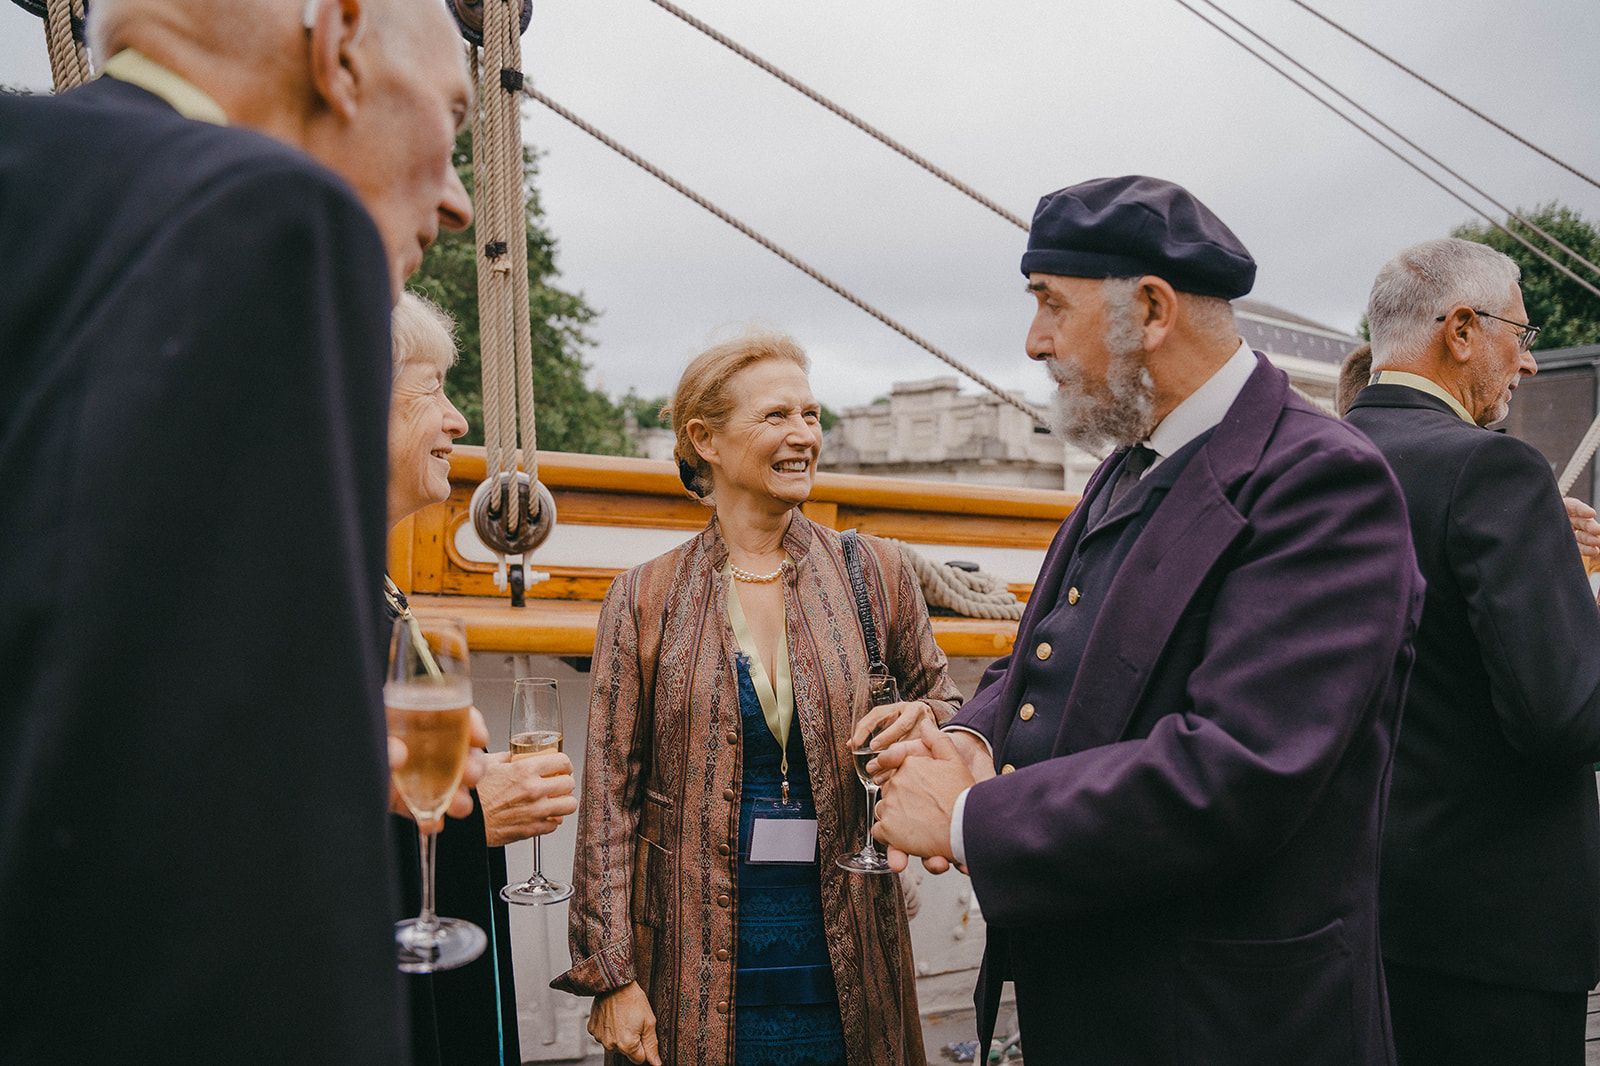 Rachel Thouron Vere Nicoll catches up with Alumni on the deck of the Cutty Sark